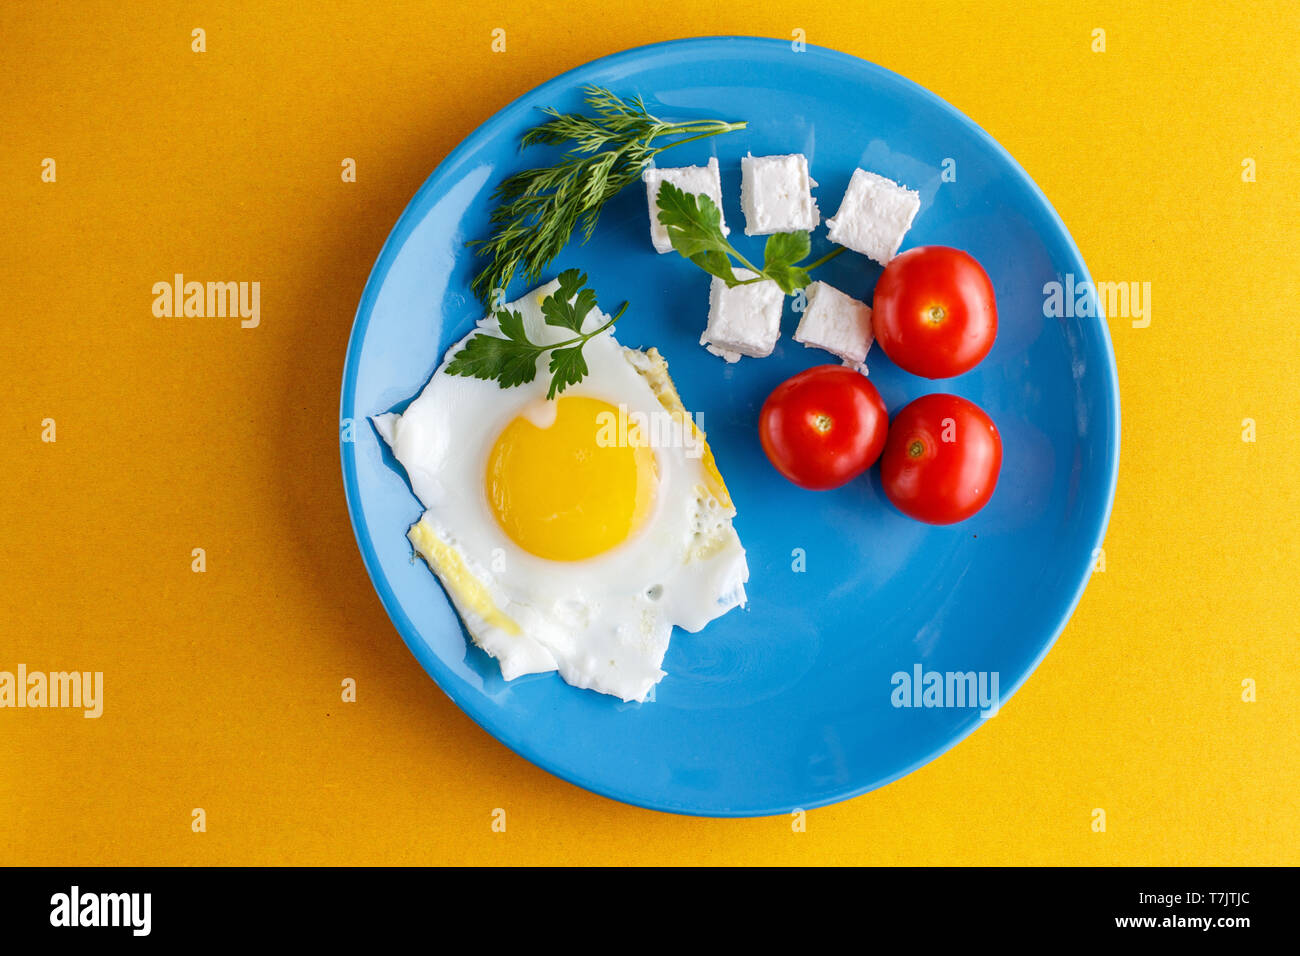 Turkish Breakfast on a blue plate on a bright yellow background Stock Photo